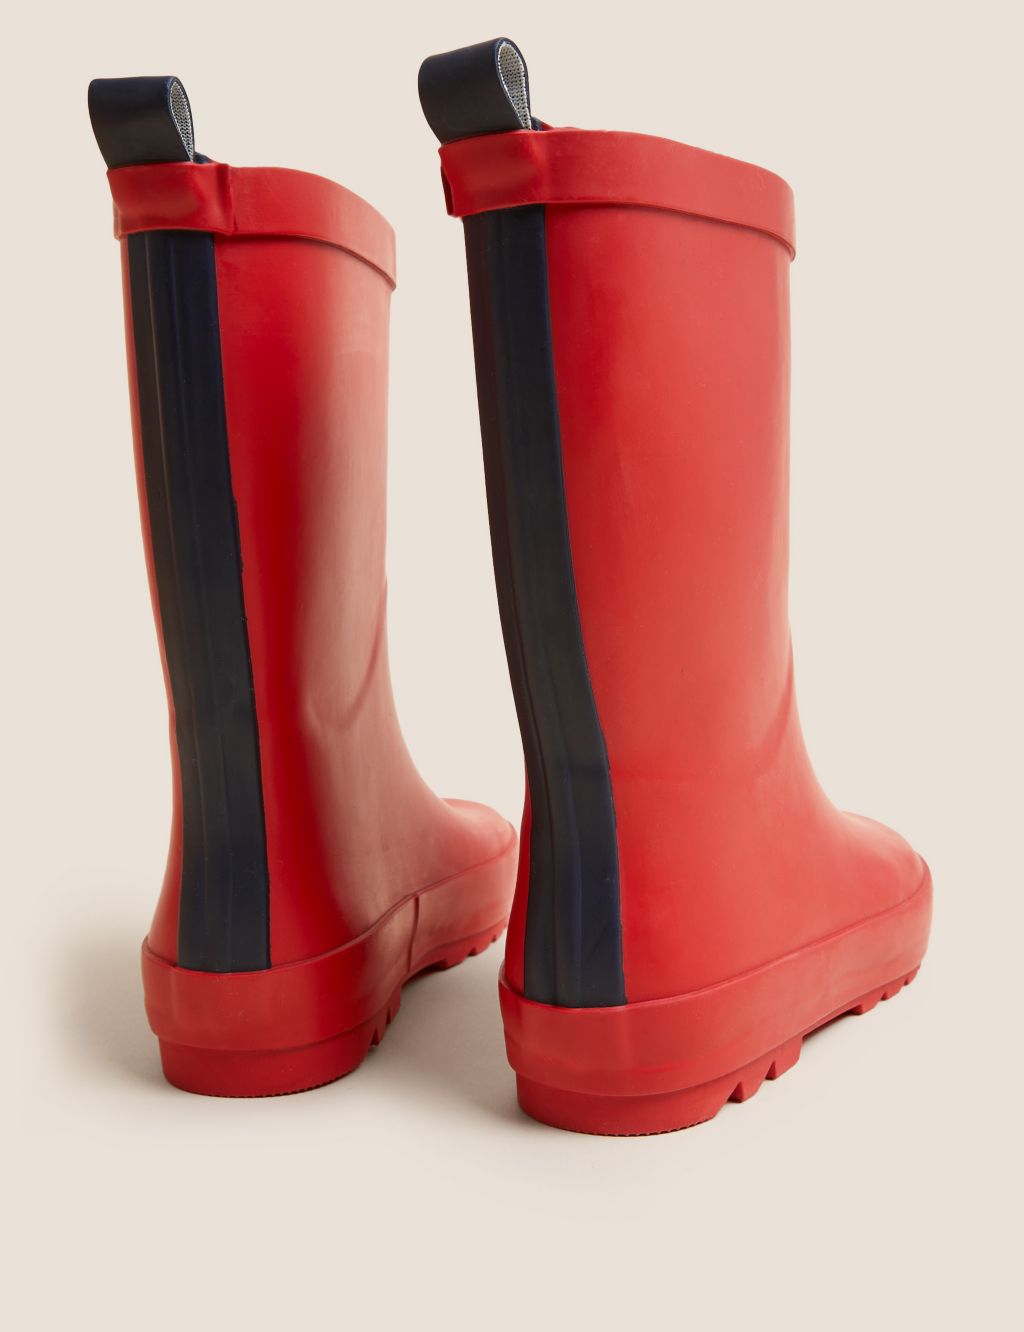 Kids' Wellies (3 Small - 2 Large) image 1